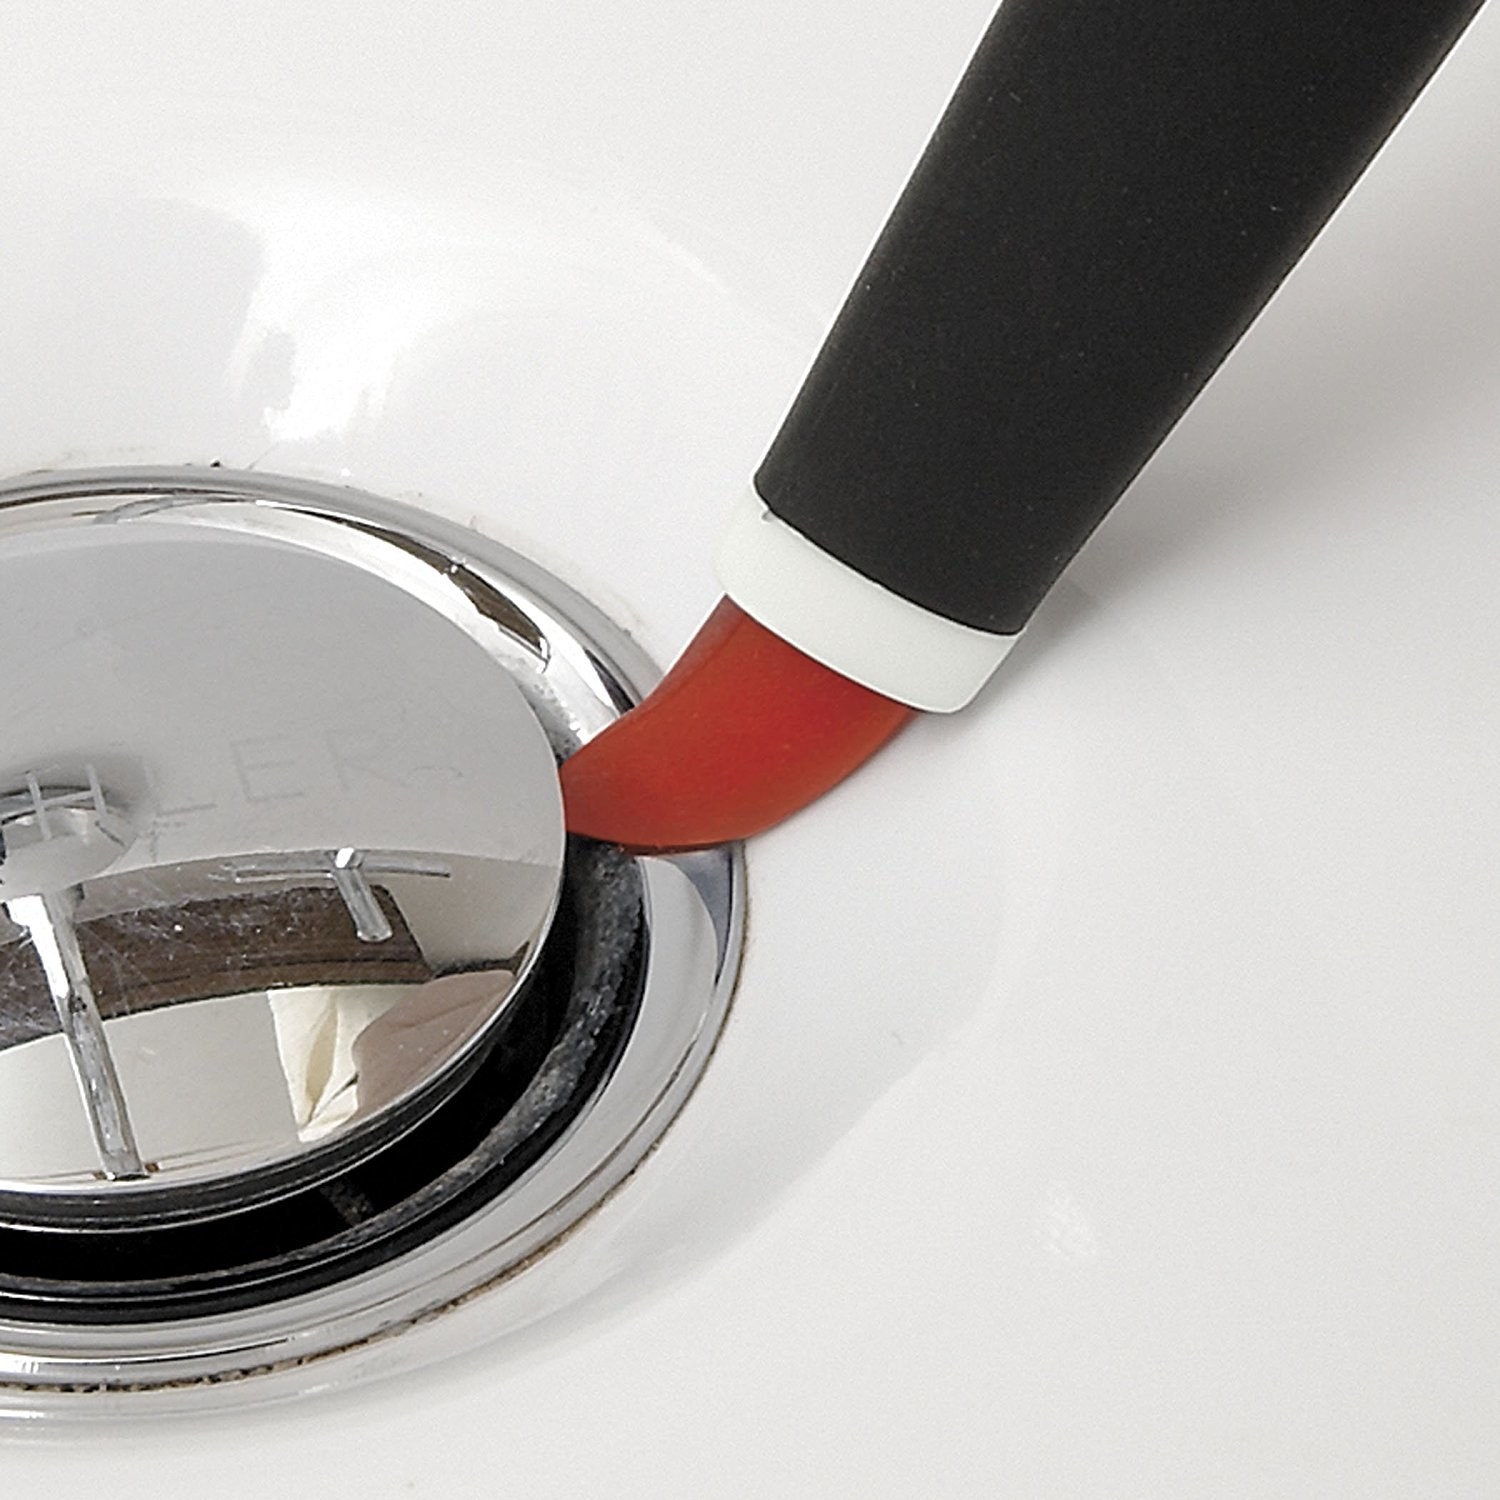 The detail cleaner brush erasing grime around a sink drain